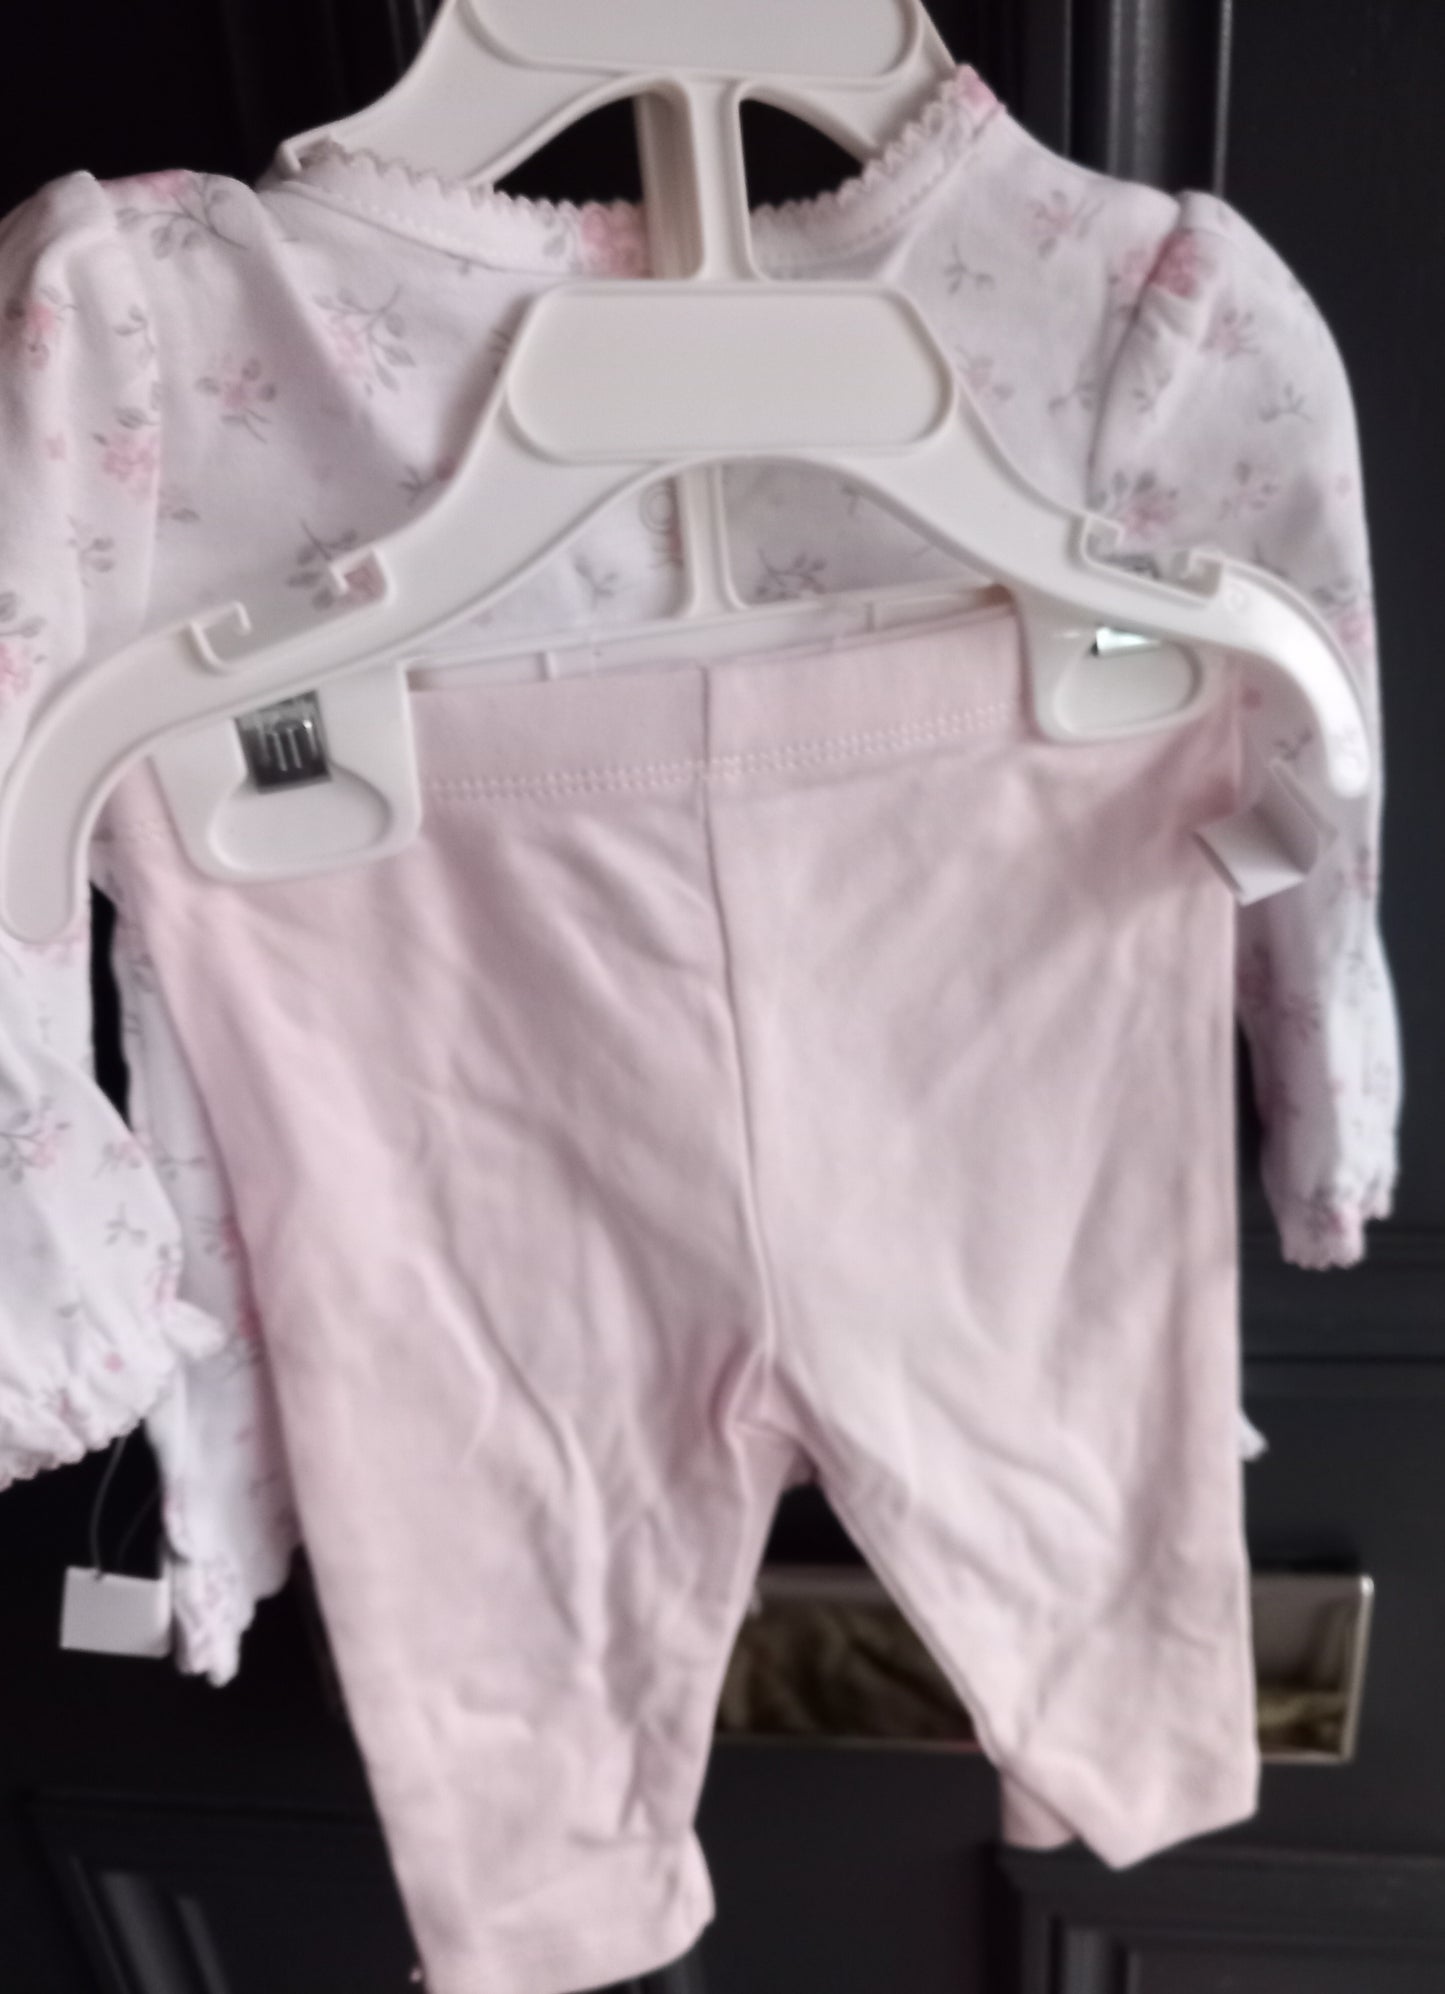 6 MTHS BABY 2 PIECE CREAM FLORAL TOP AND LEGGINGS